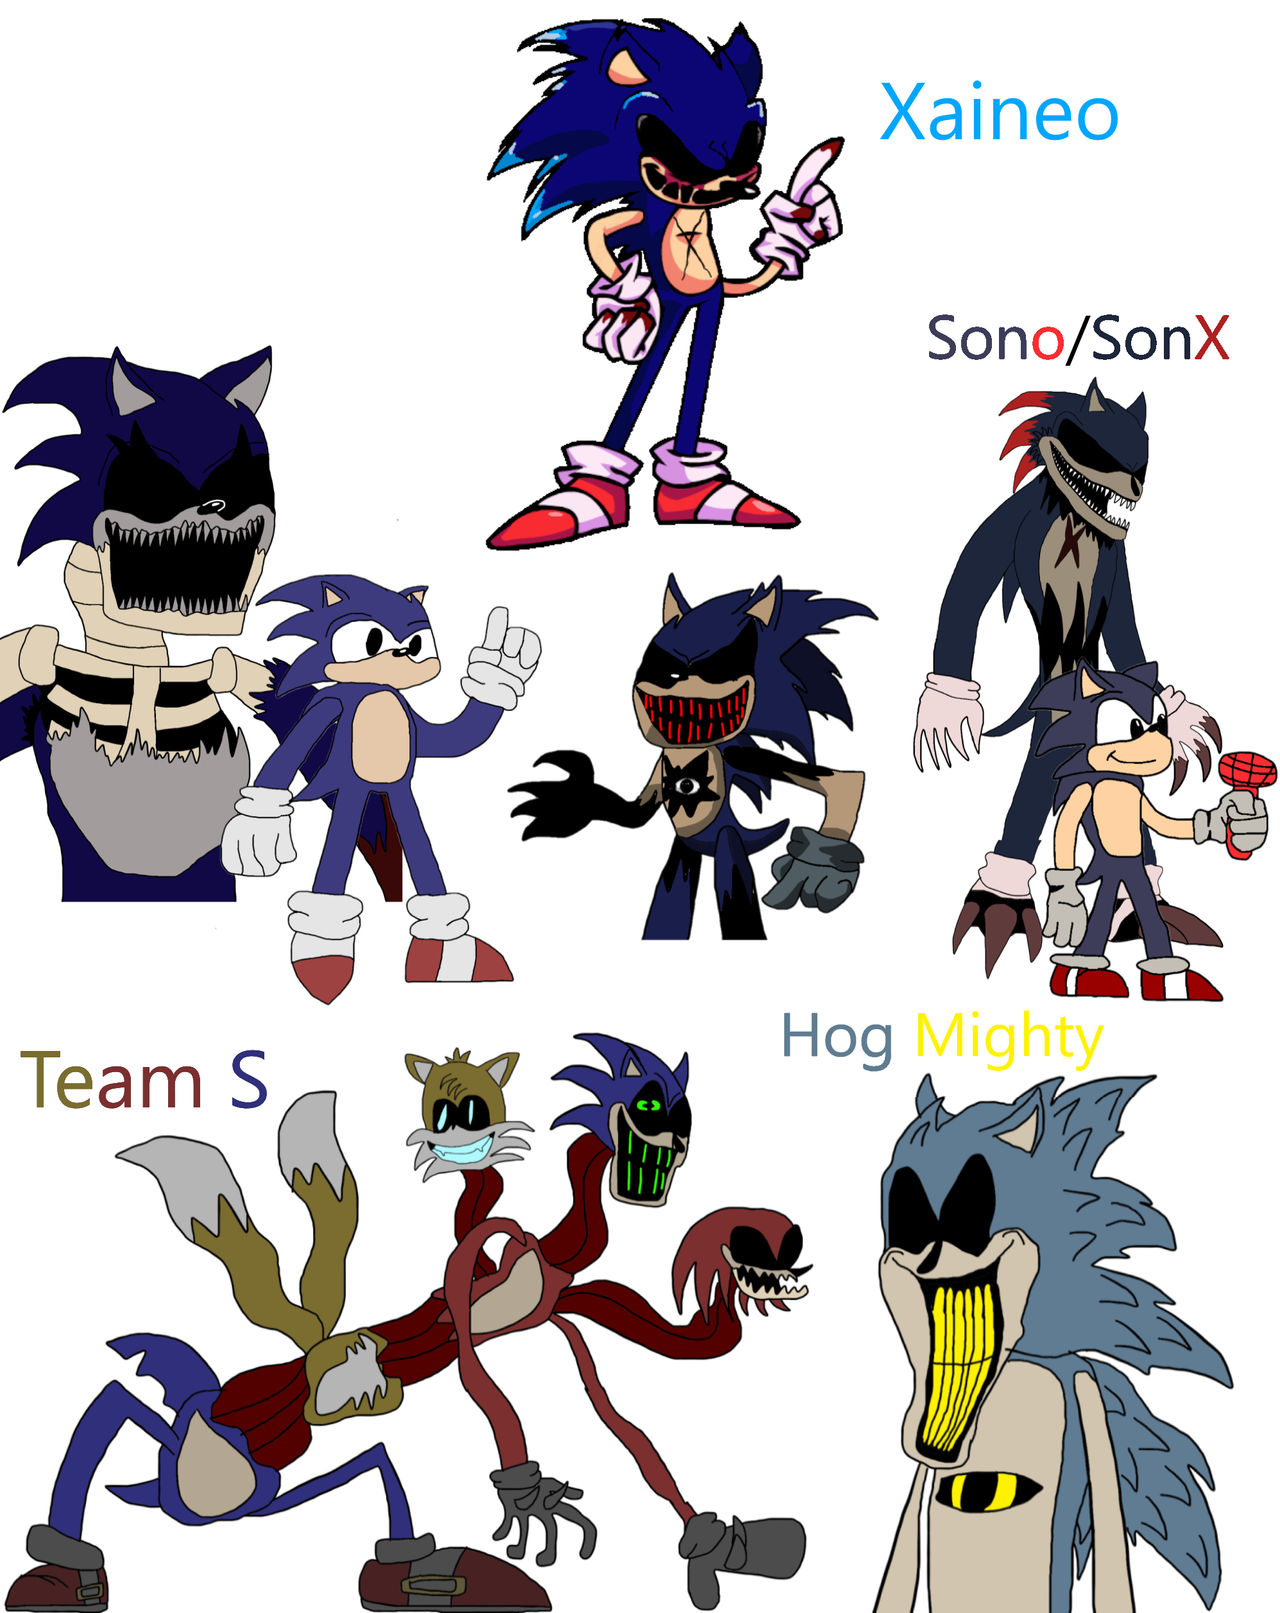 Sonic.exe: Image Gallery (List View)